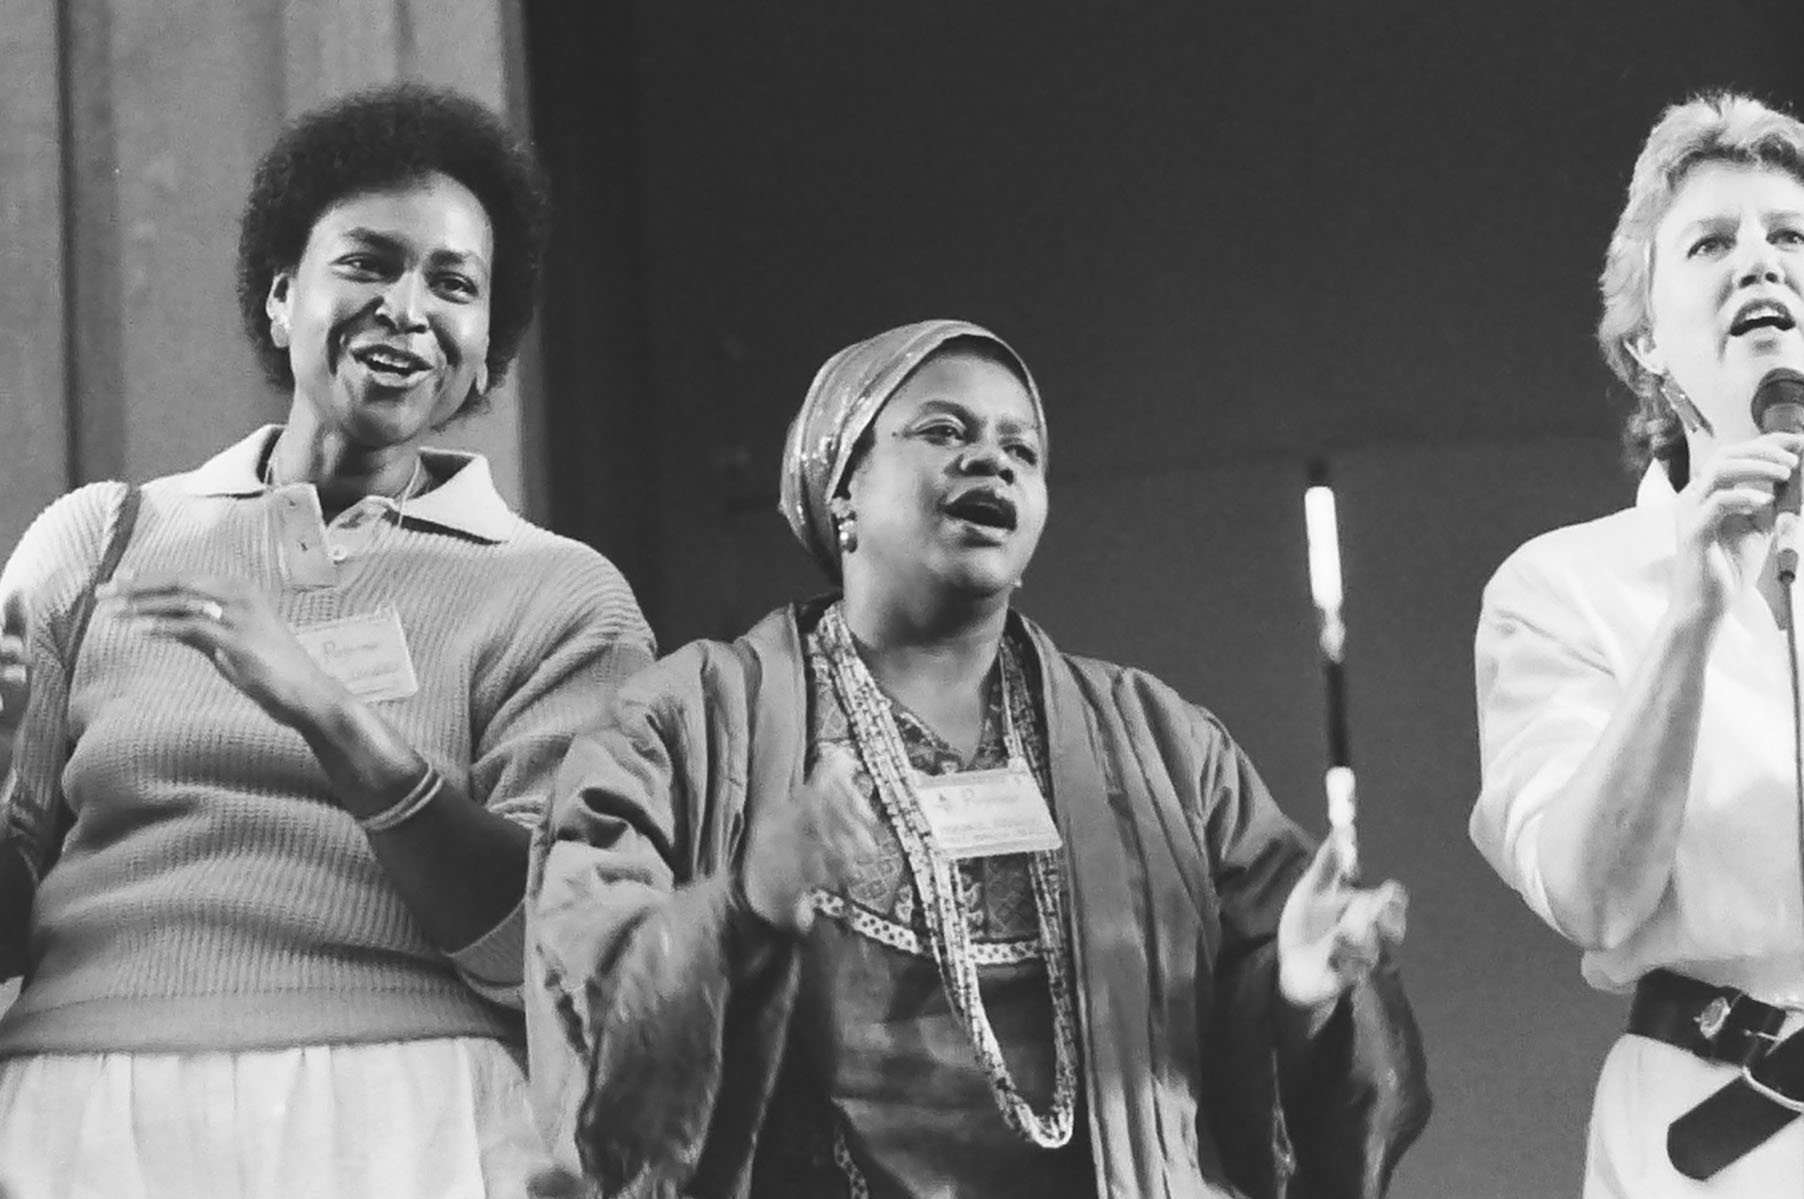 Linda Tillery, Bernice Johnson Reagon, and Holly Near performing at the Redwood Music Festival at Greek Theatre, Berkeley, CA, 1985. Photo Credit: J.A. Rubino. Photo courtesy of Holly Near.